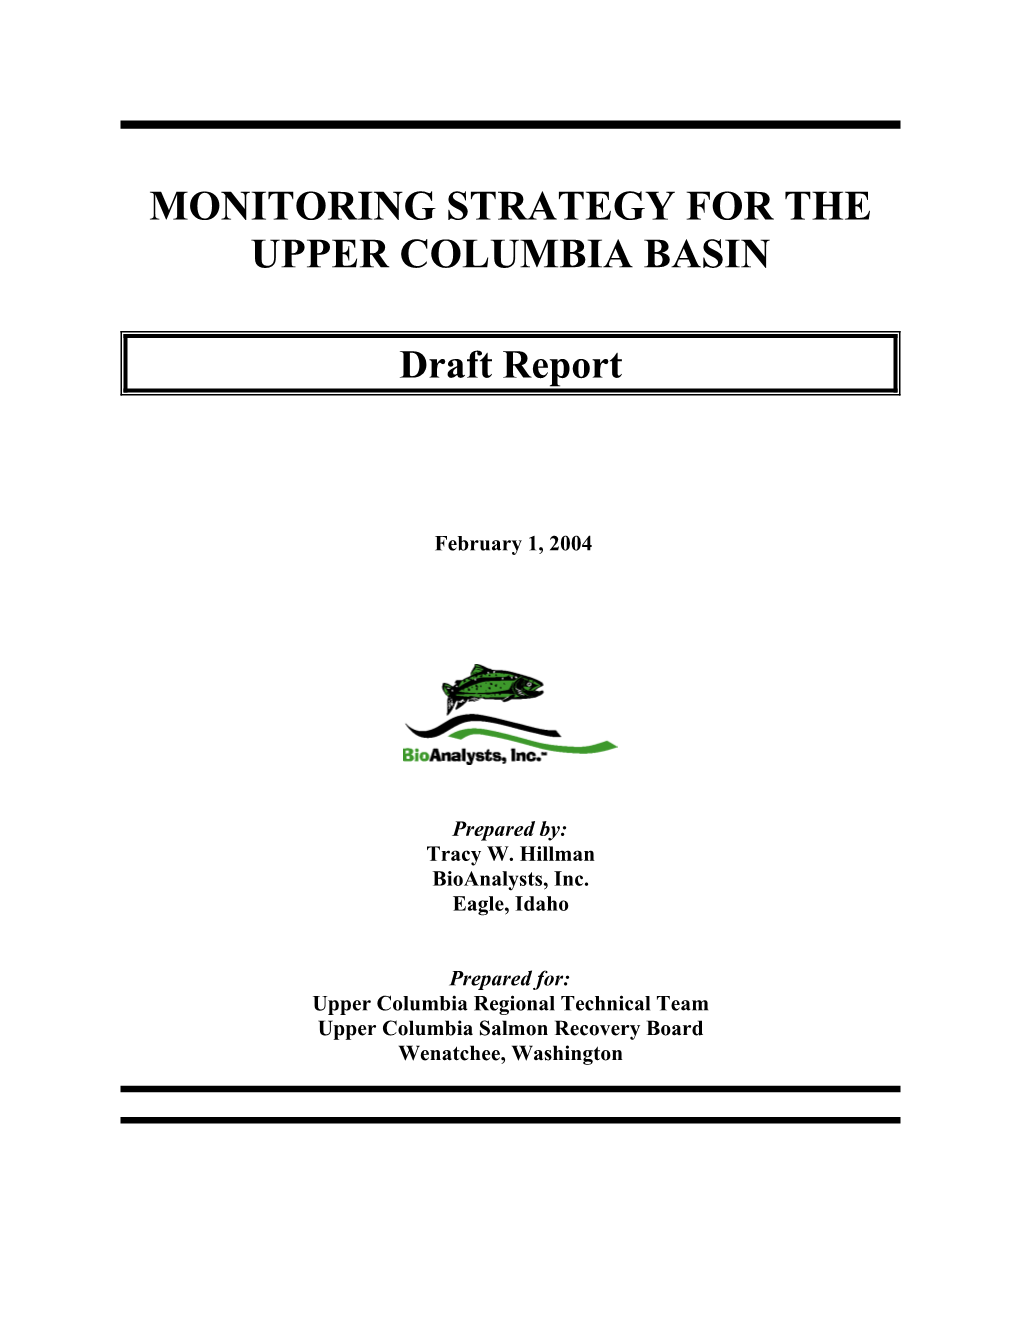 Monitoring Strategy for the Upper Columbia Basin